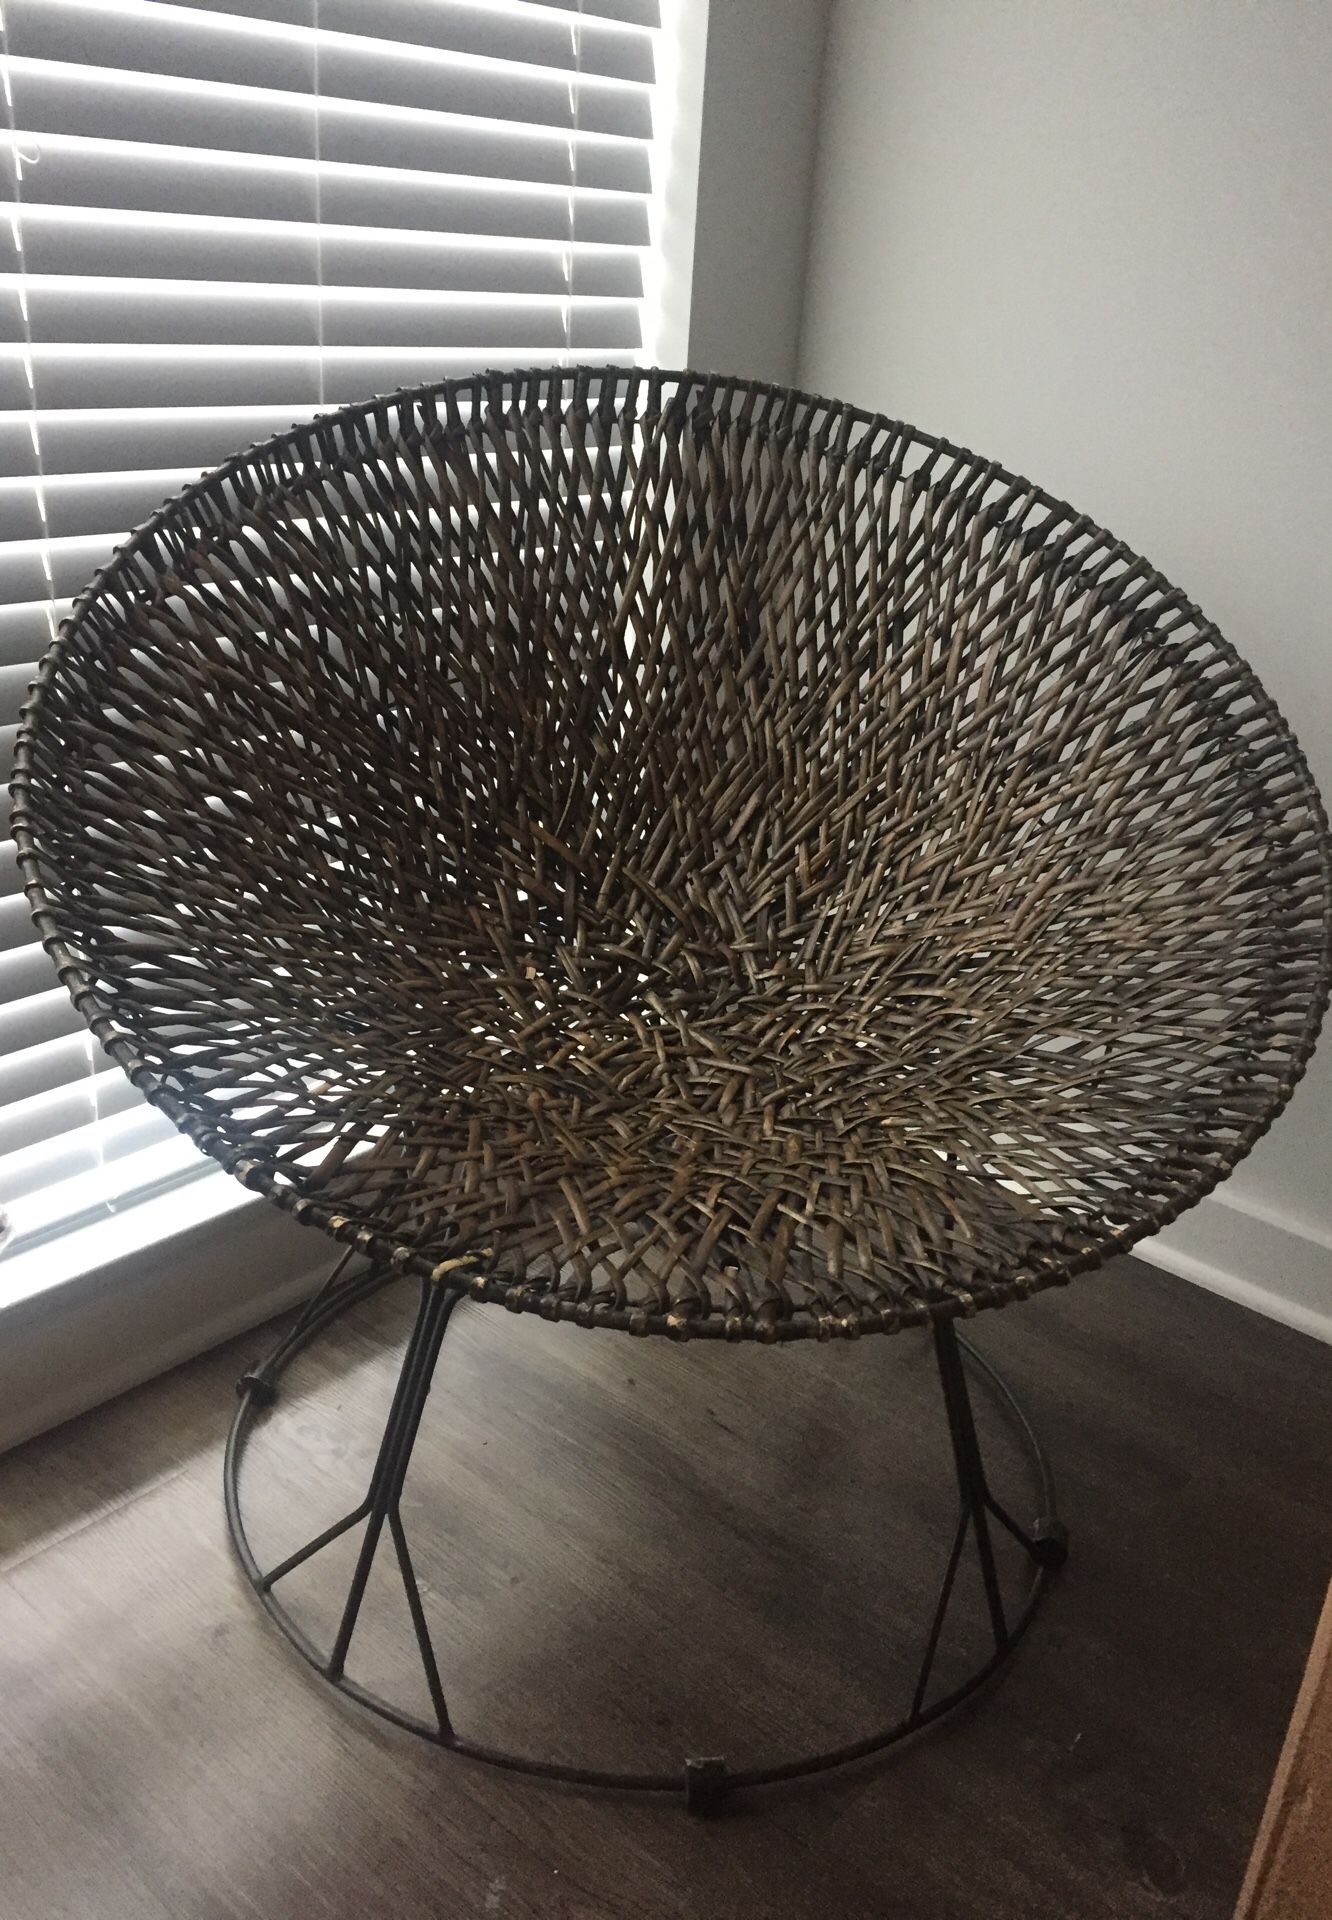 Pier 1 Imports rattan lounge chair